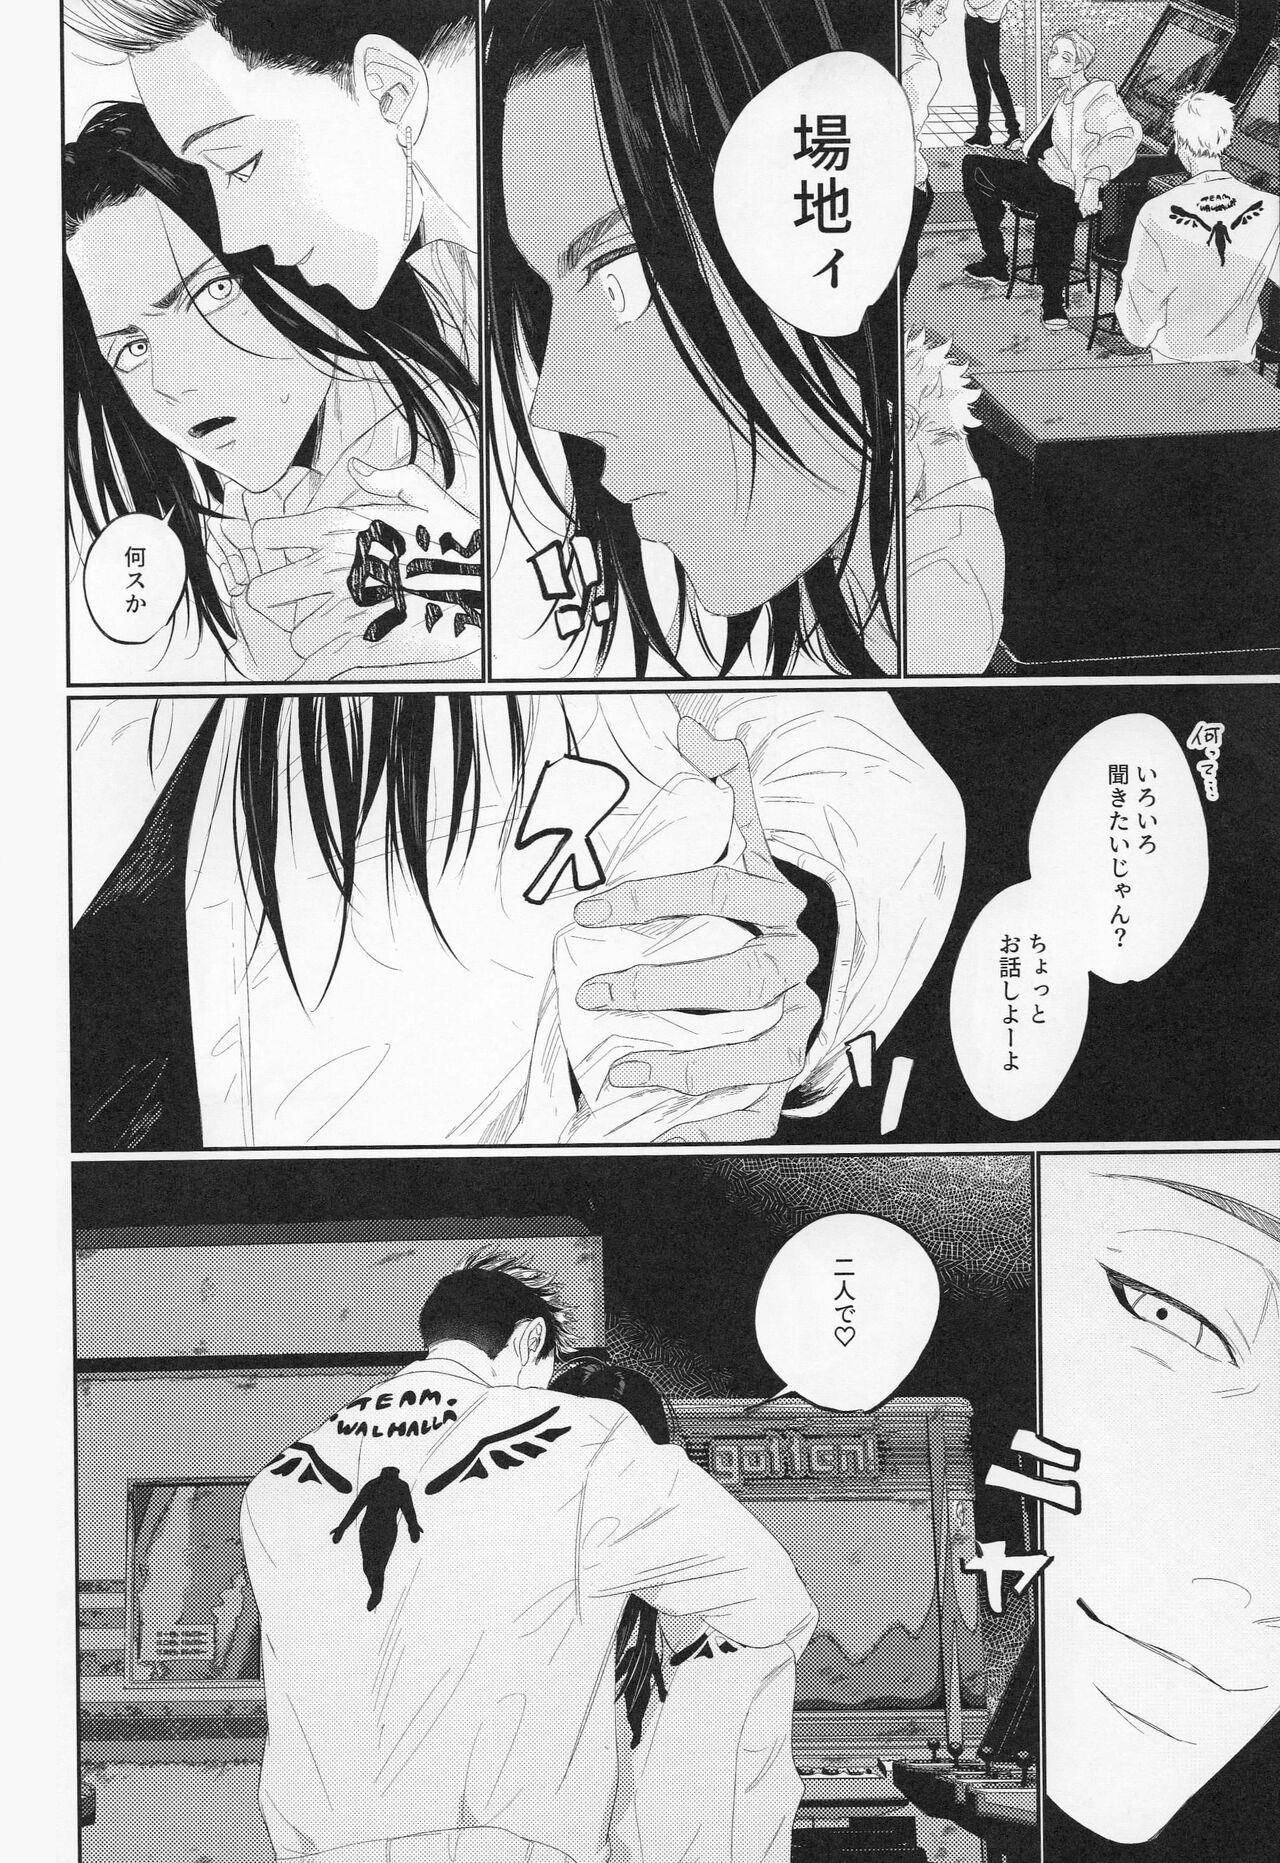 Blowjobs Valhalla e Youkoso - Welcome to Valhalla - Tokyo revengers Analsex - Page 5